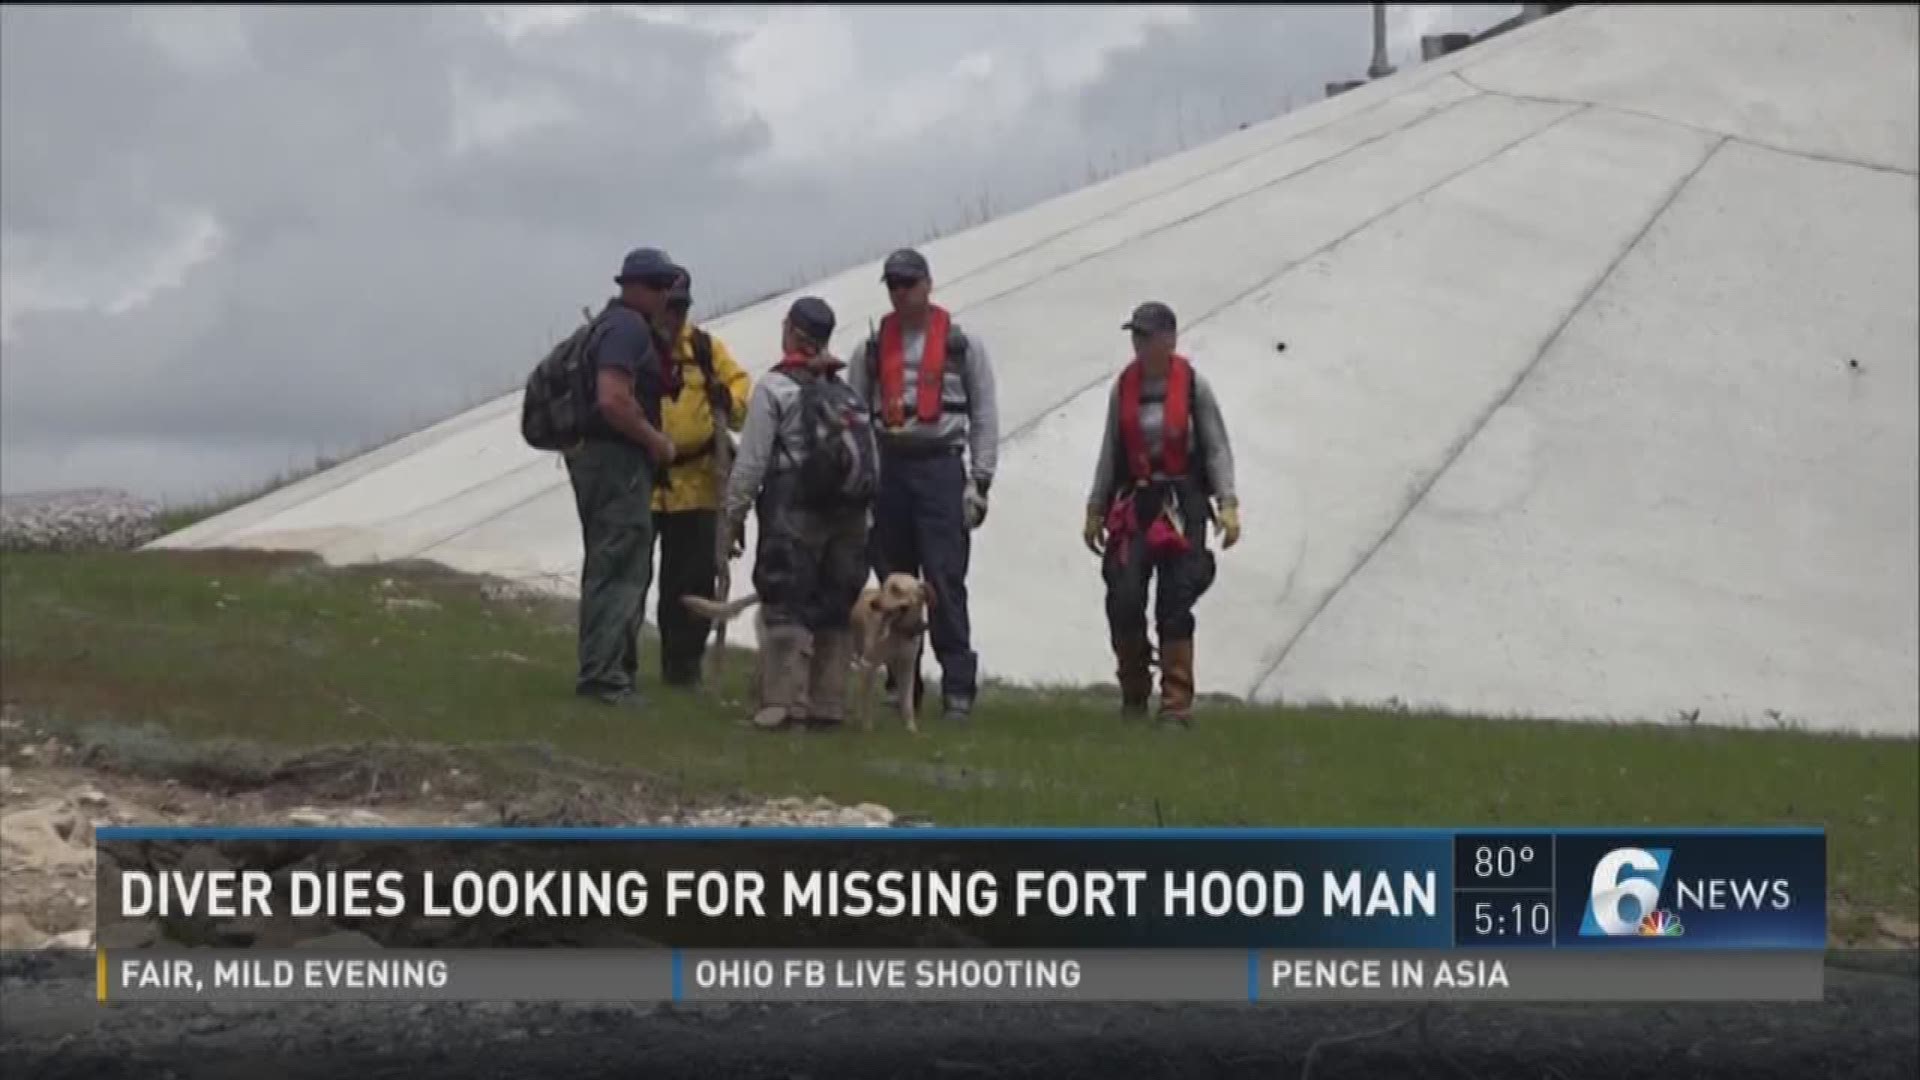 A diver who was working with the search teams looking for a missing man has died.